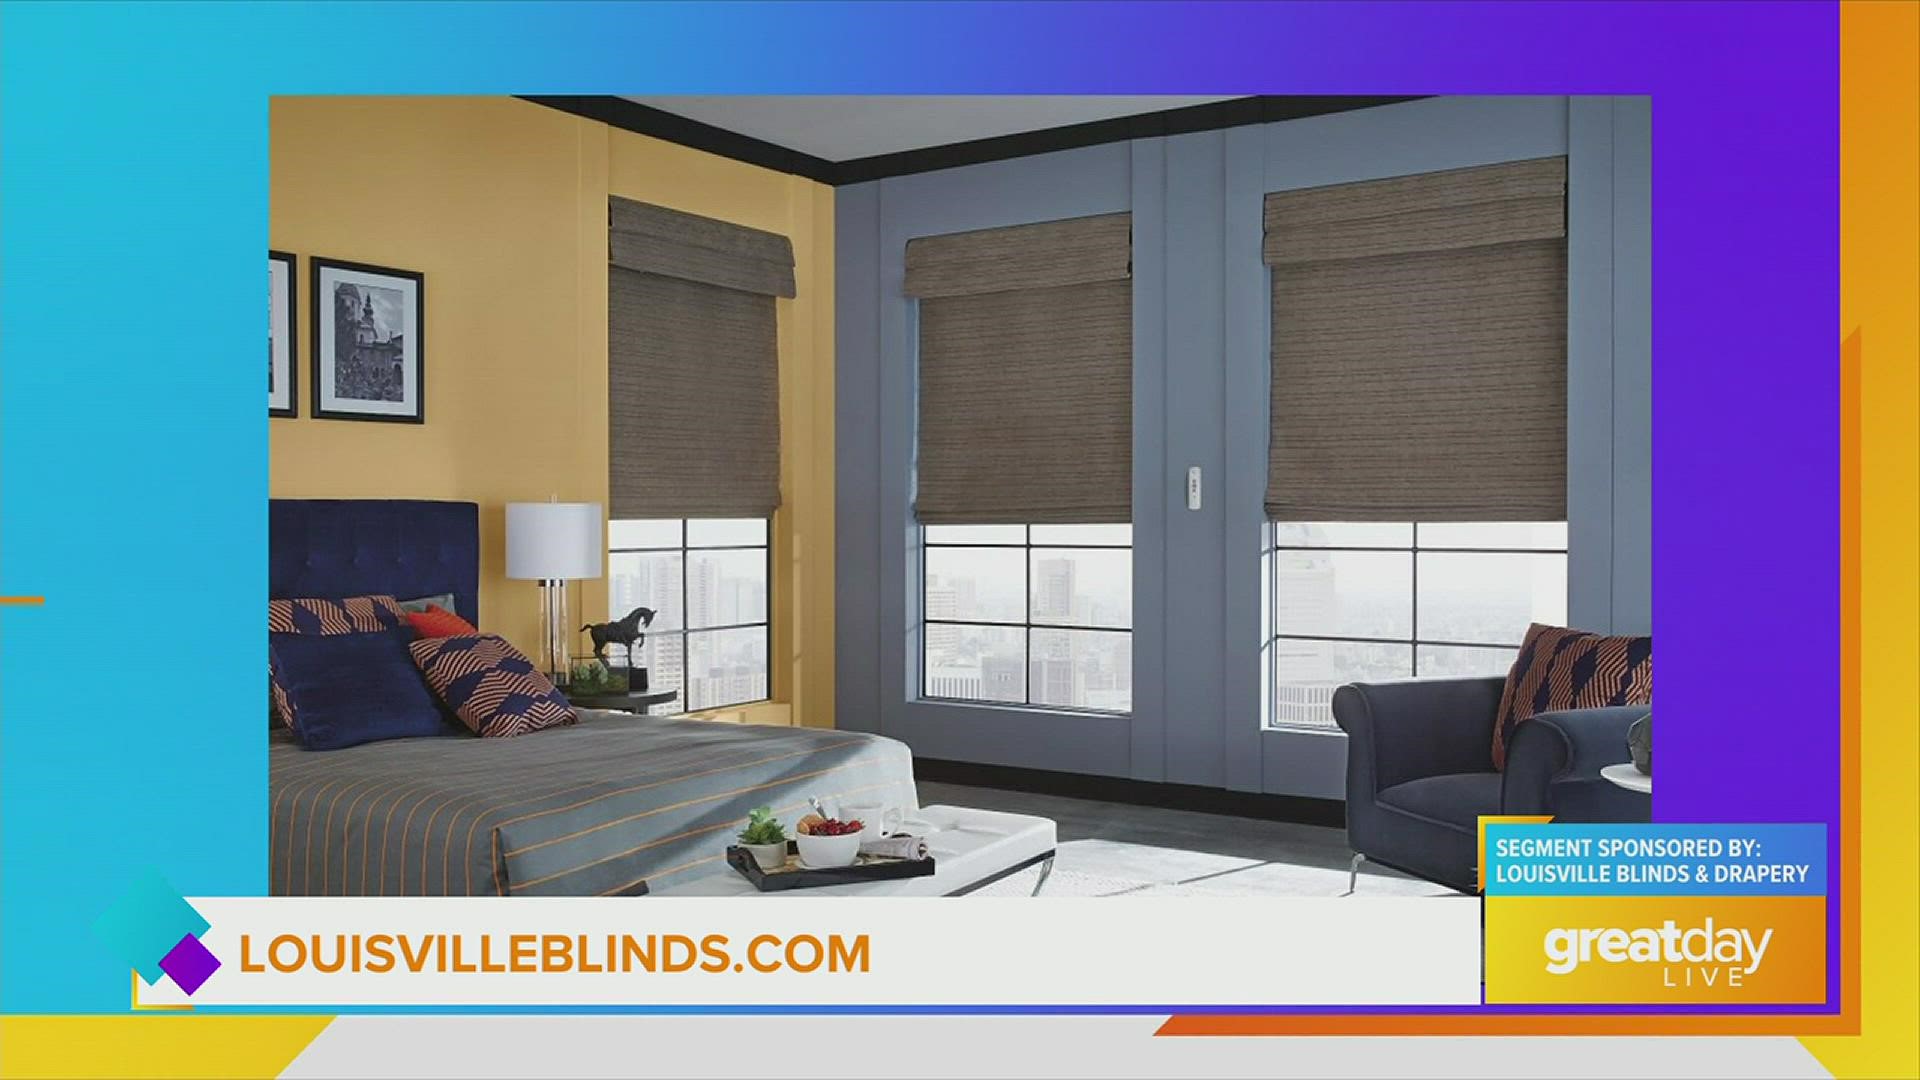 Louisville Blind and Drapery on Great Day Live!